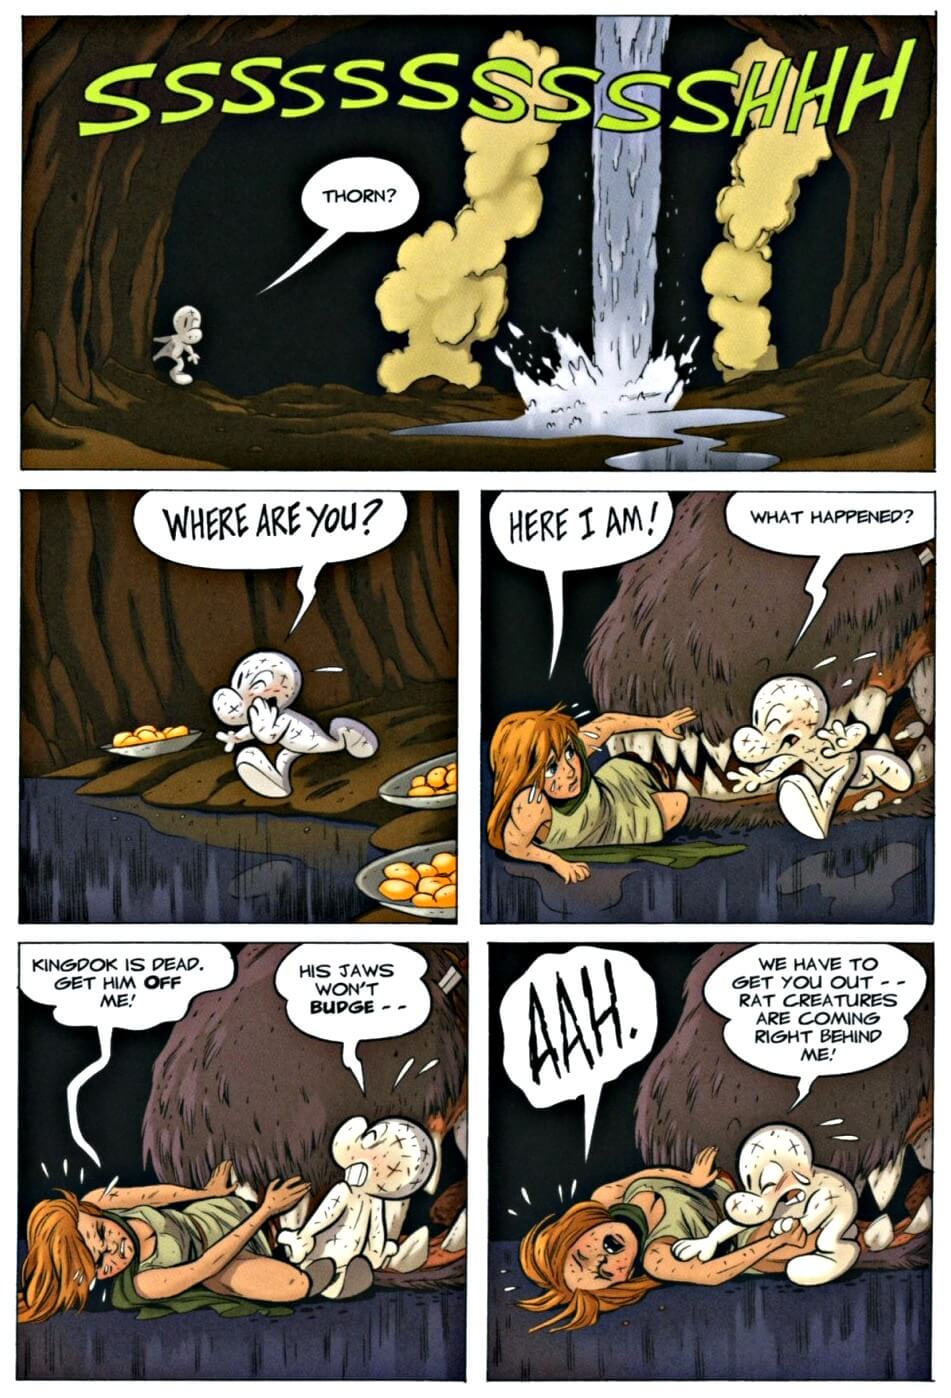 page 146 chapter 5 of bone 9 crown of horns graphic novel